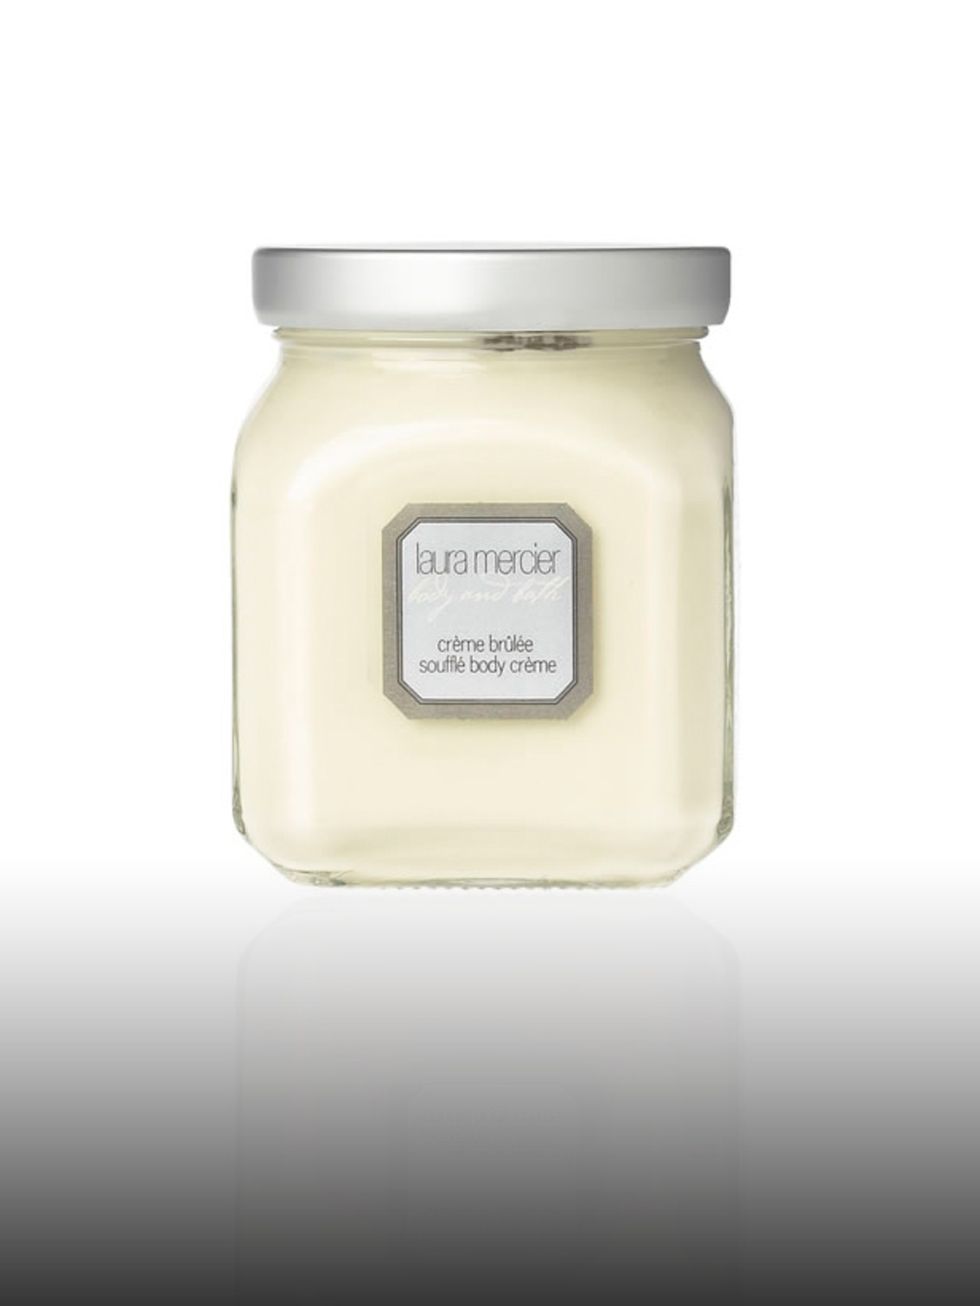 <p>Creme Brulee souffle body creme £40 by Laura Mercier. For stockists call 0800 123 400.</p><p>Living in L.A. Kimberley likes to keep her skin hydrated with Laura Mercier's luxe and divine smelling body cream. </p>